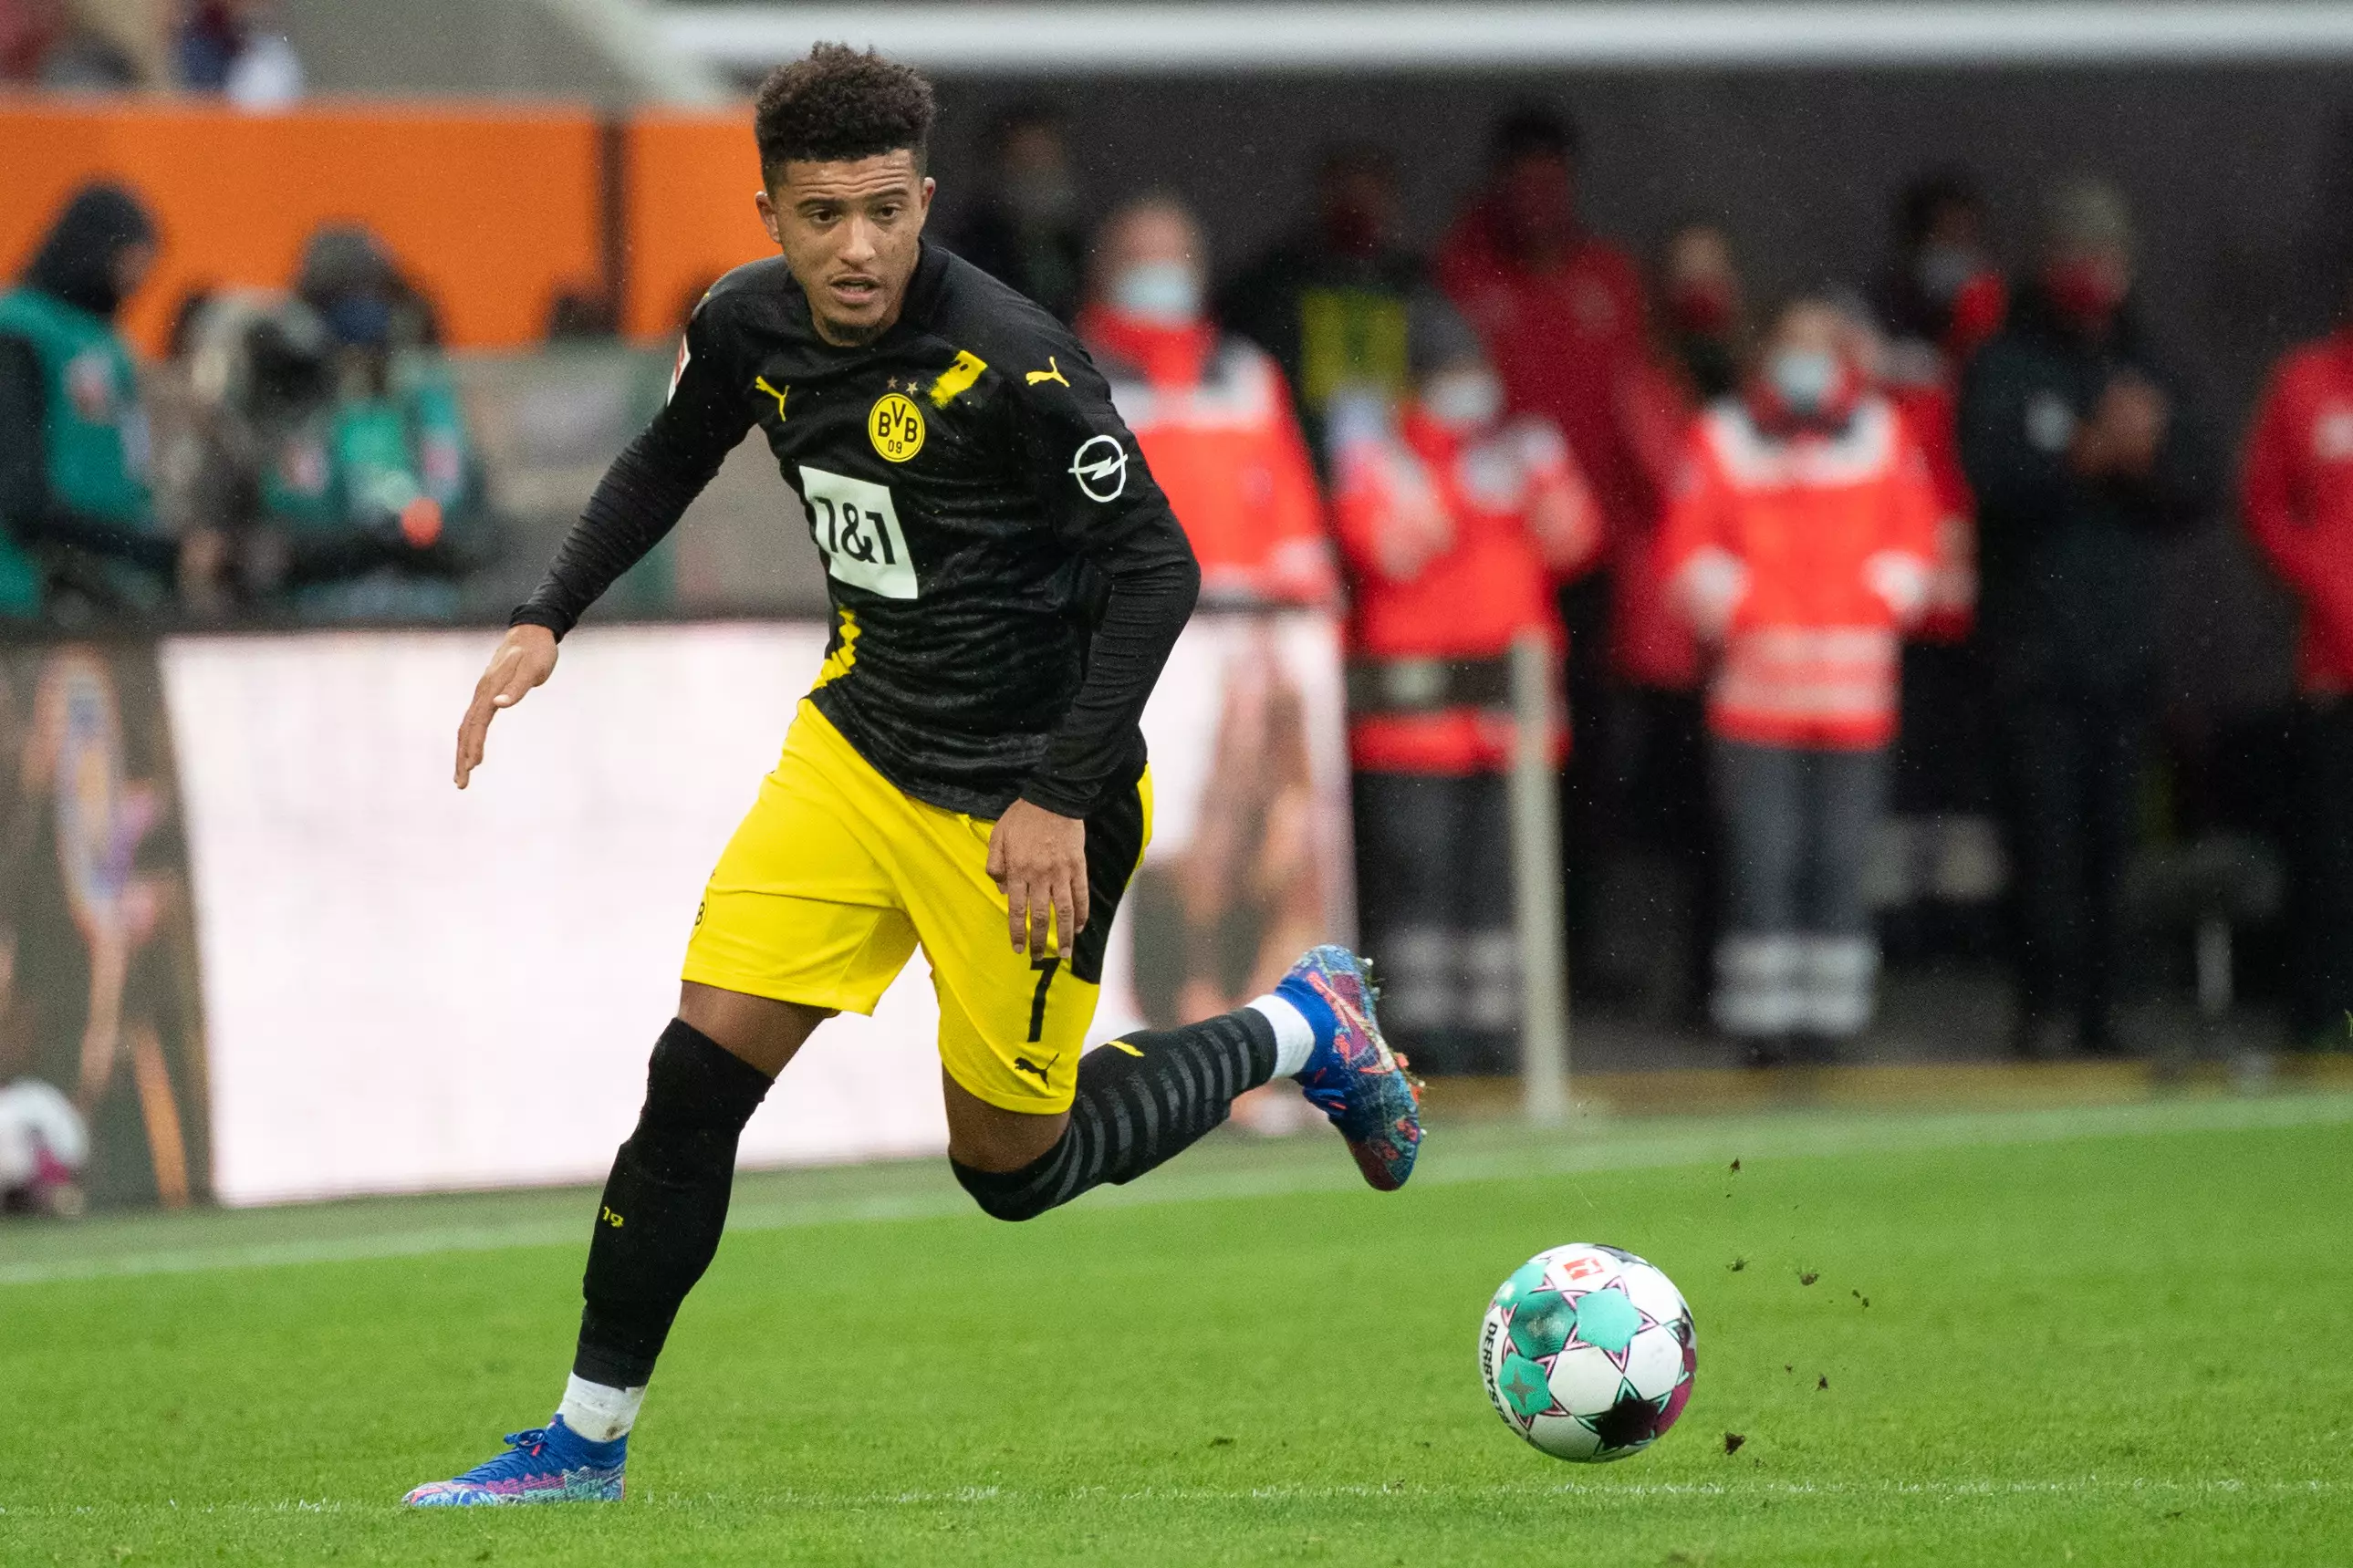 Sancho has played for Dortmund this season already but has missed the previous two games. Image: PA Images